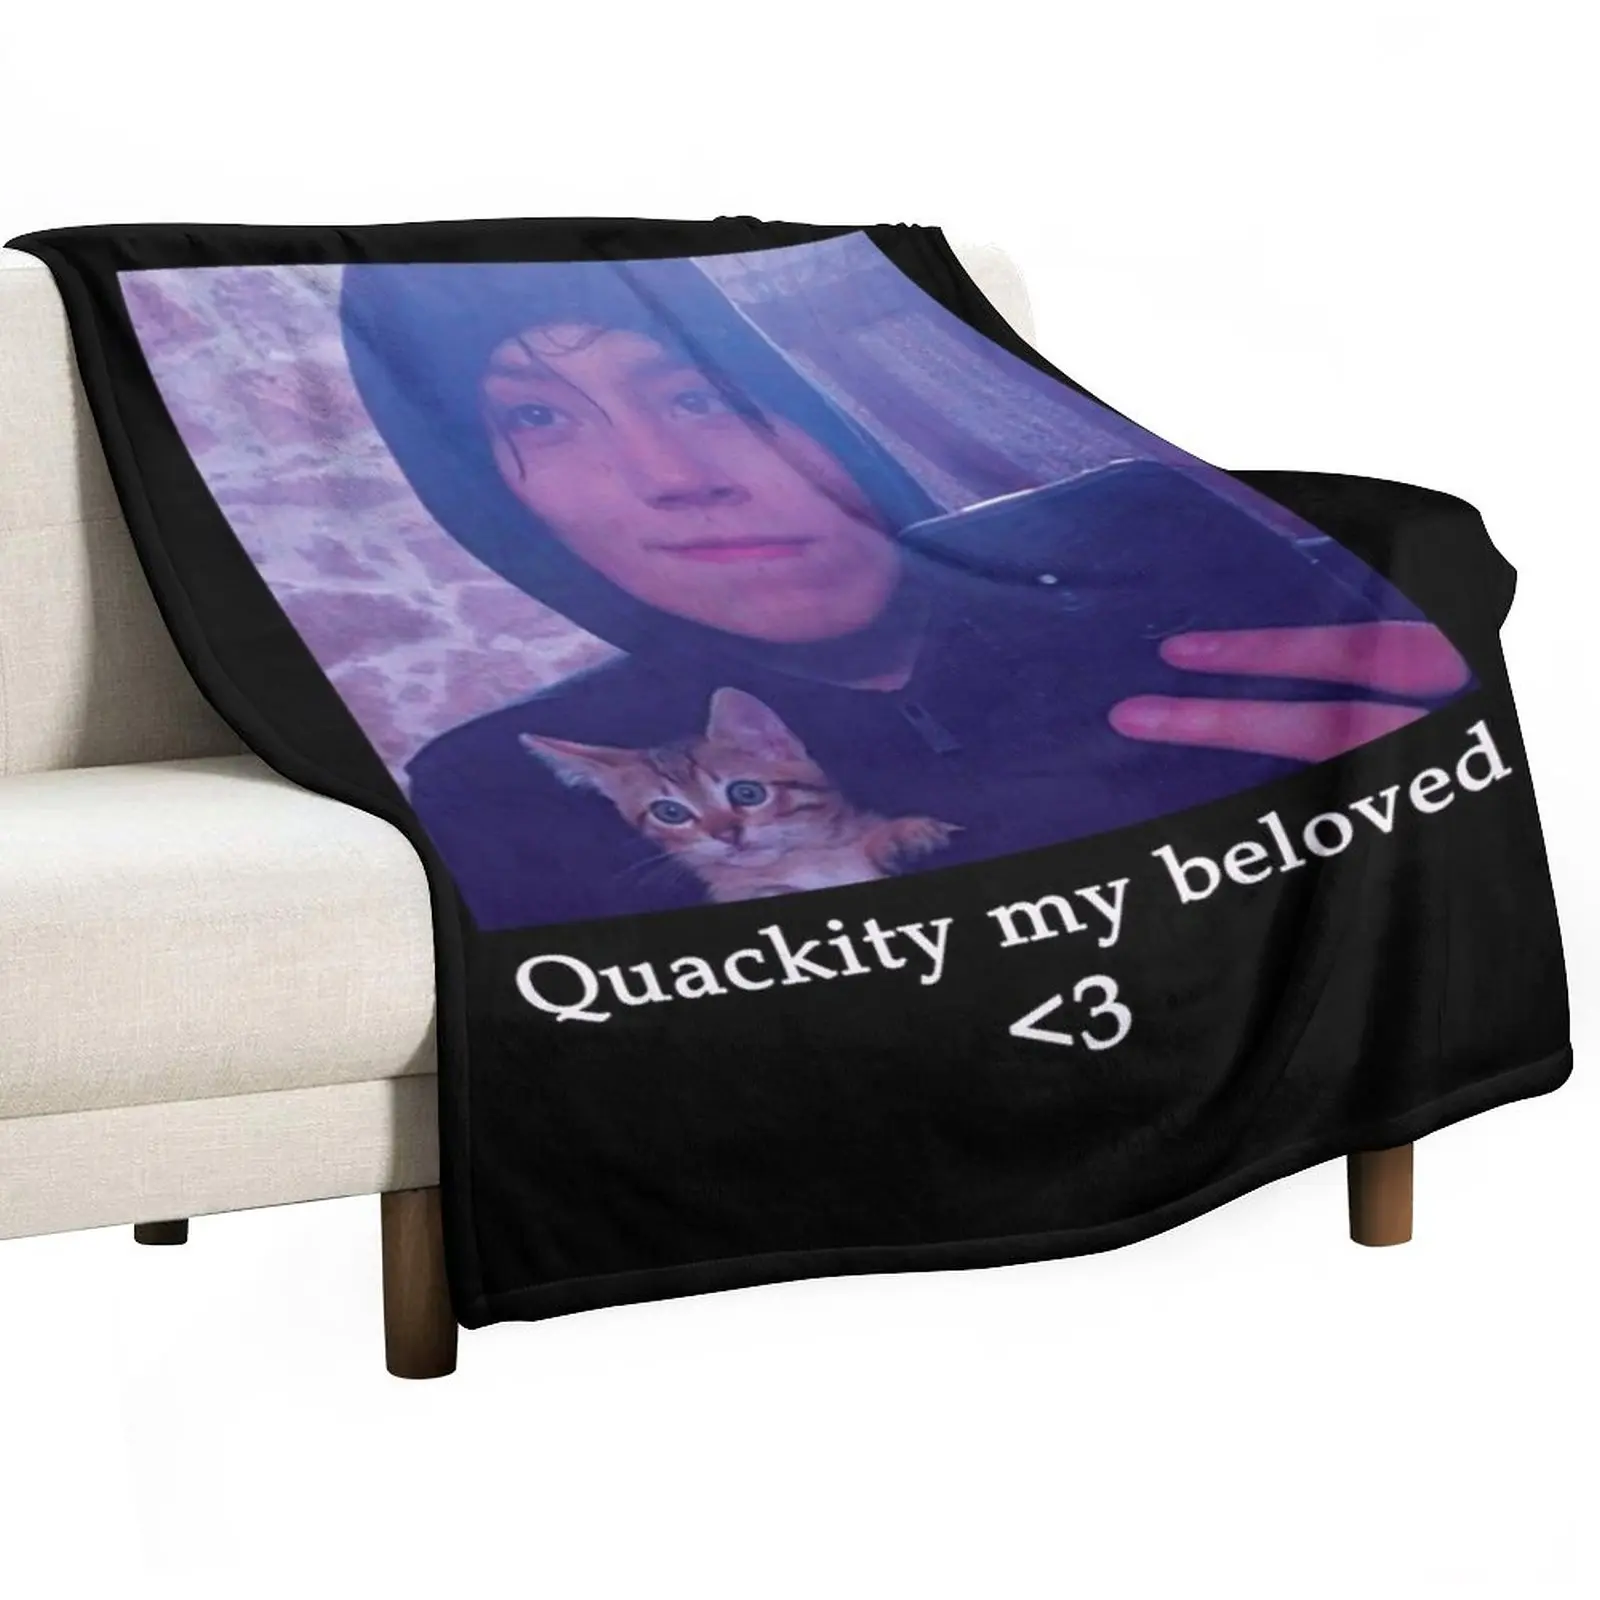 

Quackity my beloved | Beloved Quackity | Dream SMP Throw Blanket for sofa Summer Beddings Soft Plush Plaid Softest Blankets